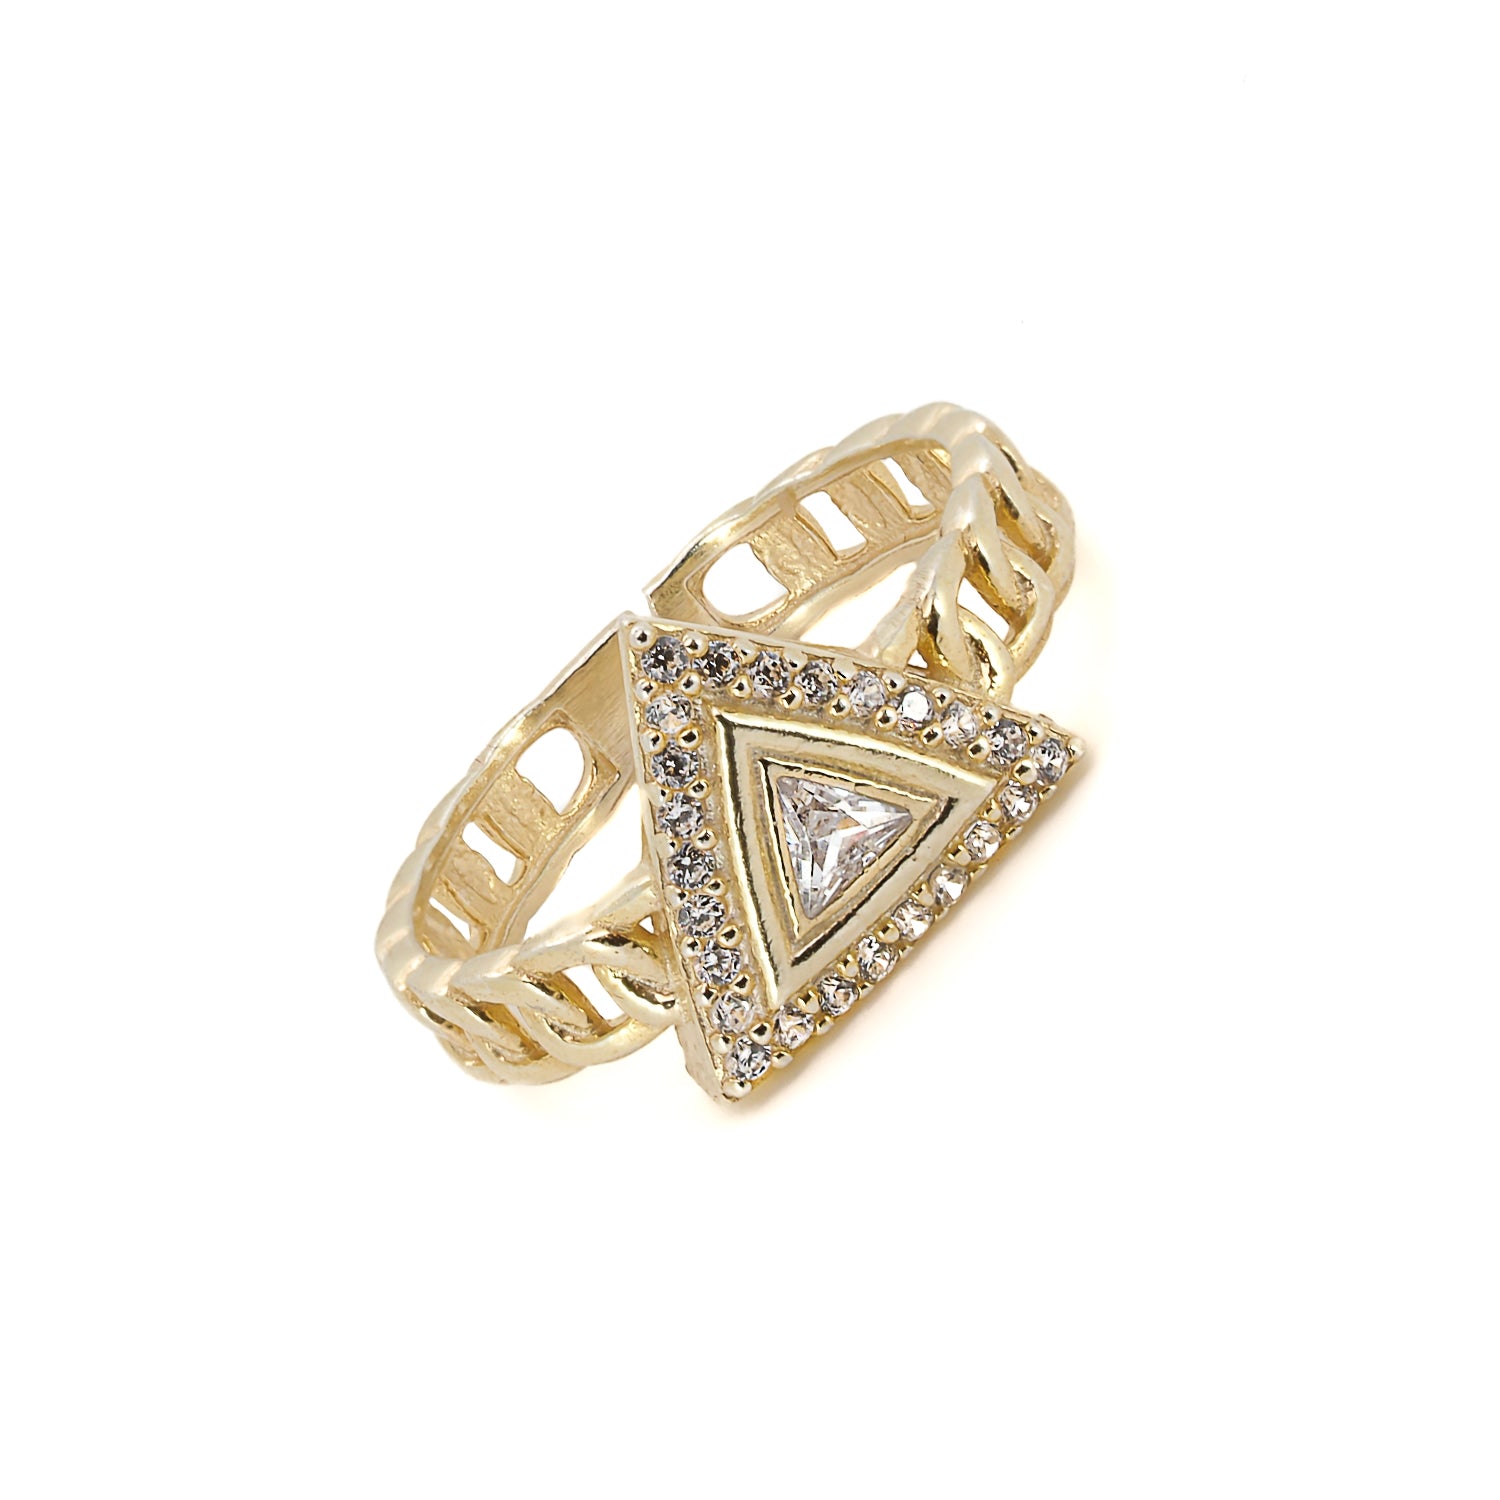 Capture the allure of timeless elegance with the Gold Vermeil Diamond Ring.